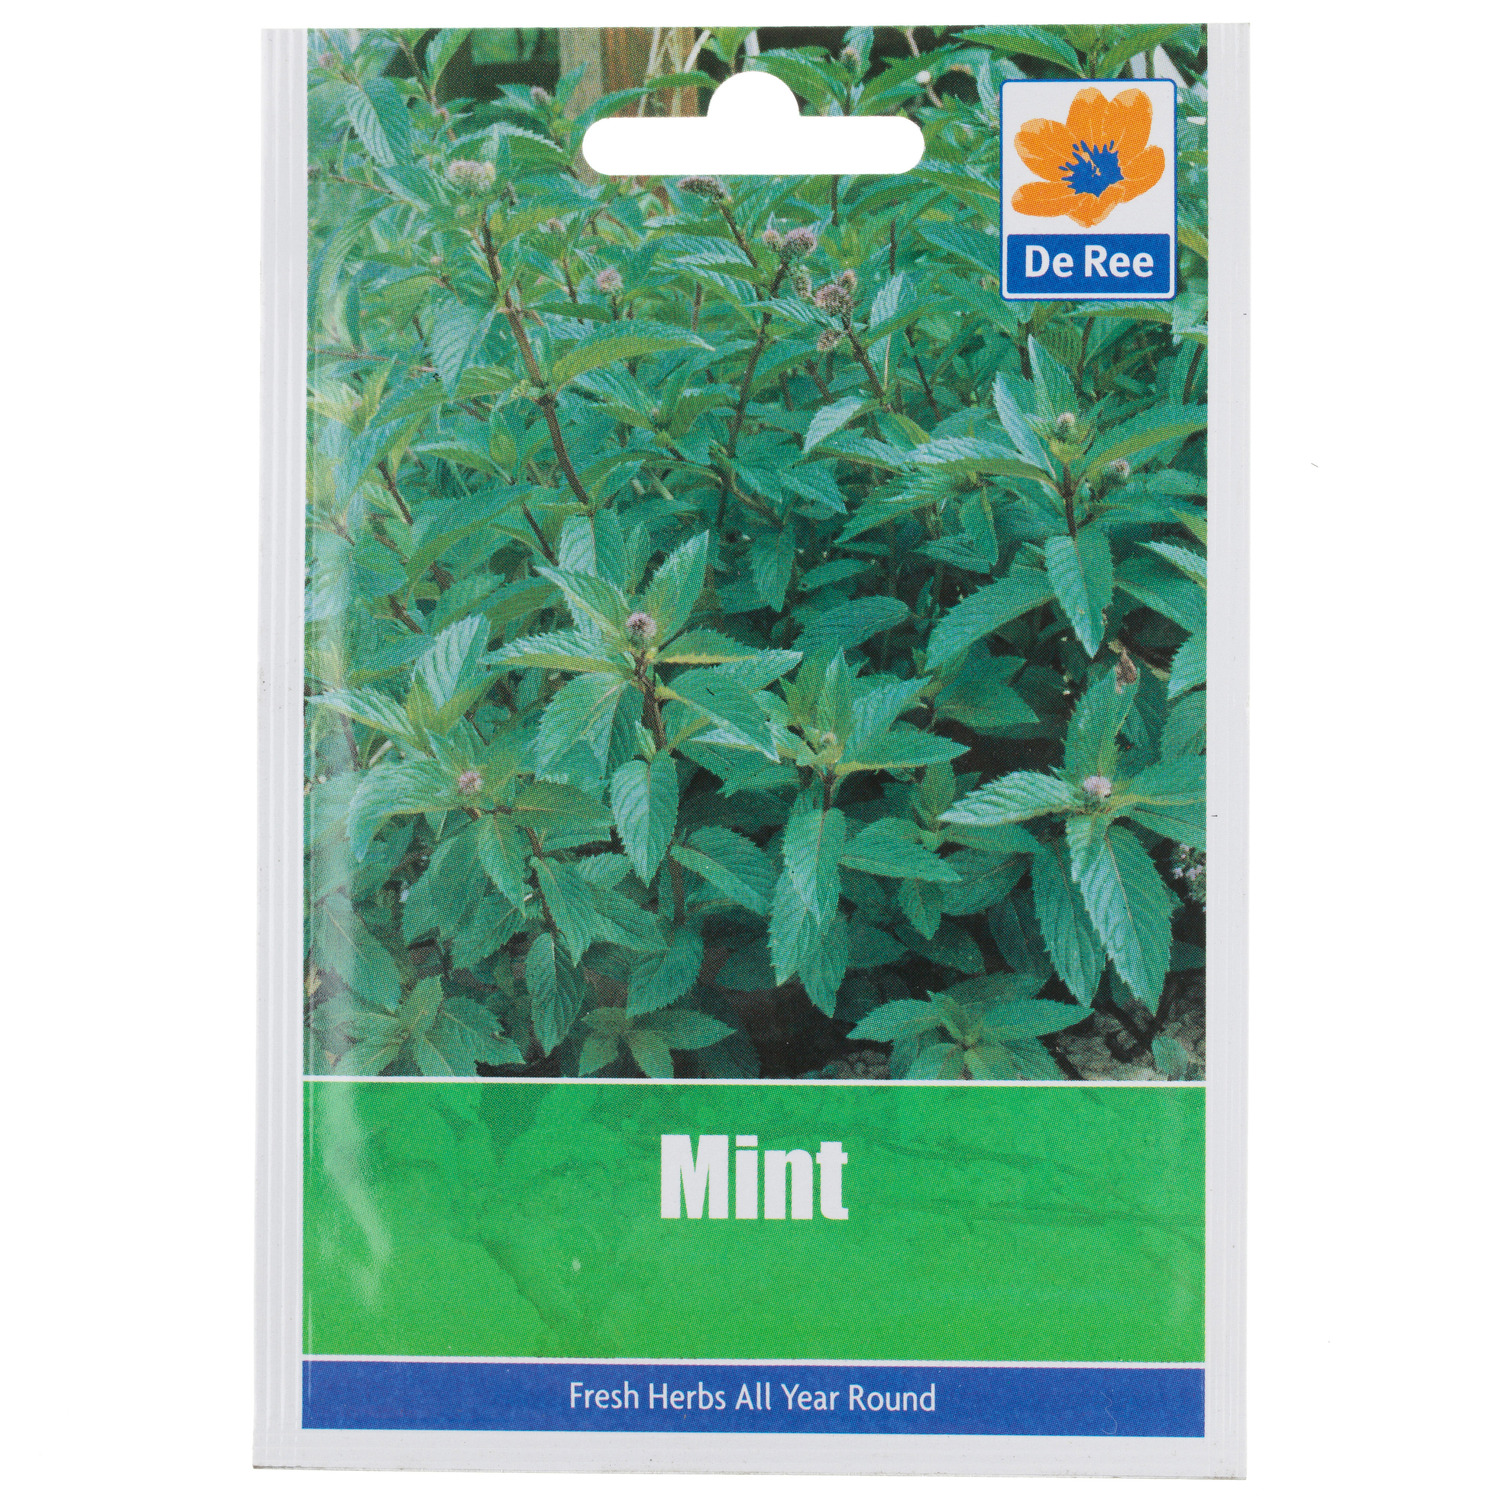 Mint Seed Packet Image